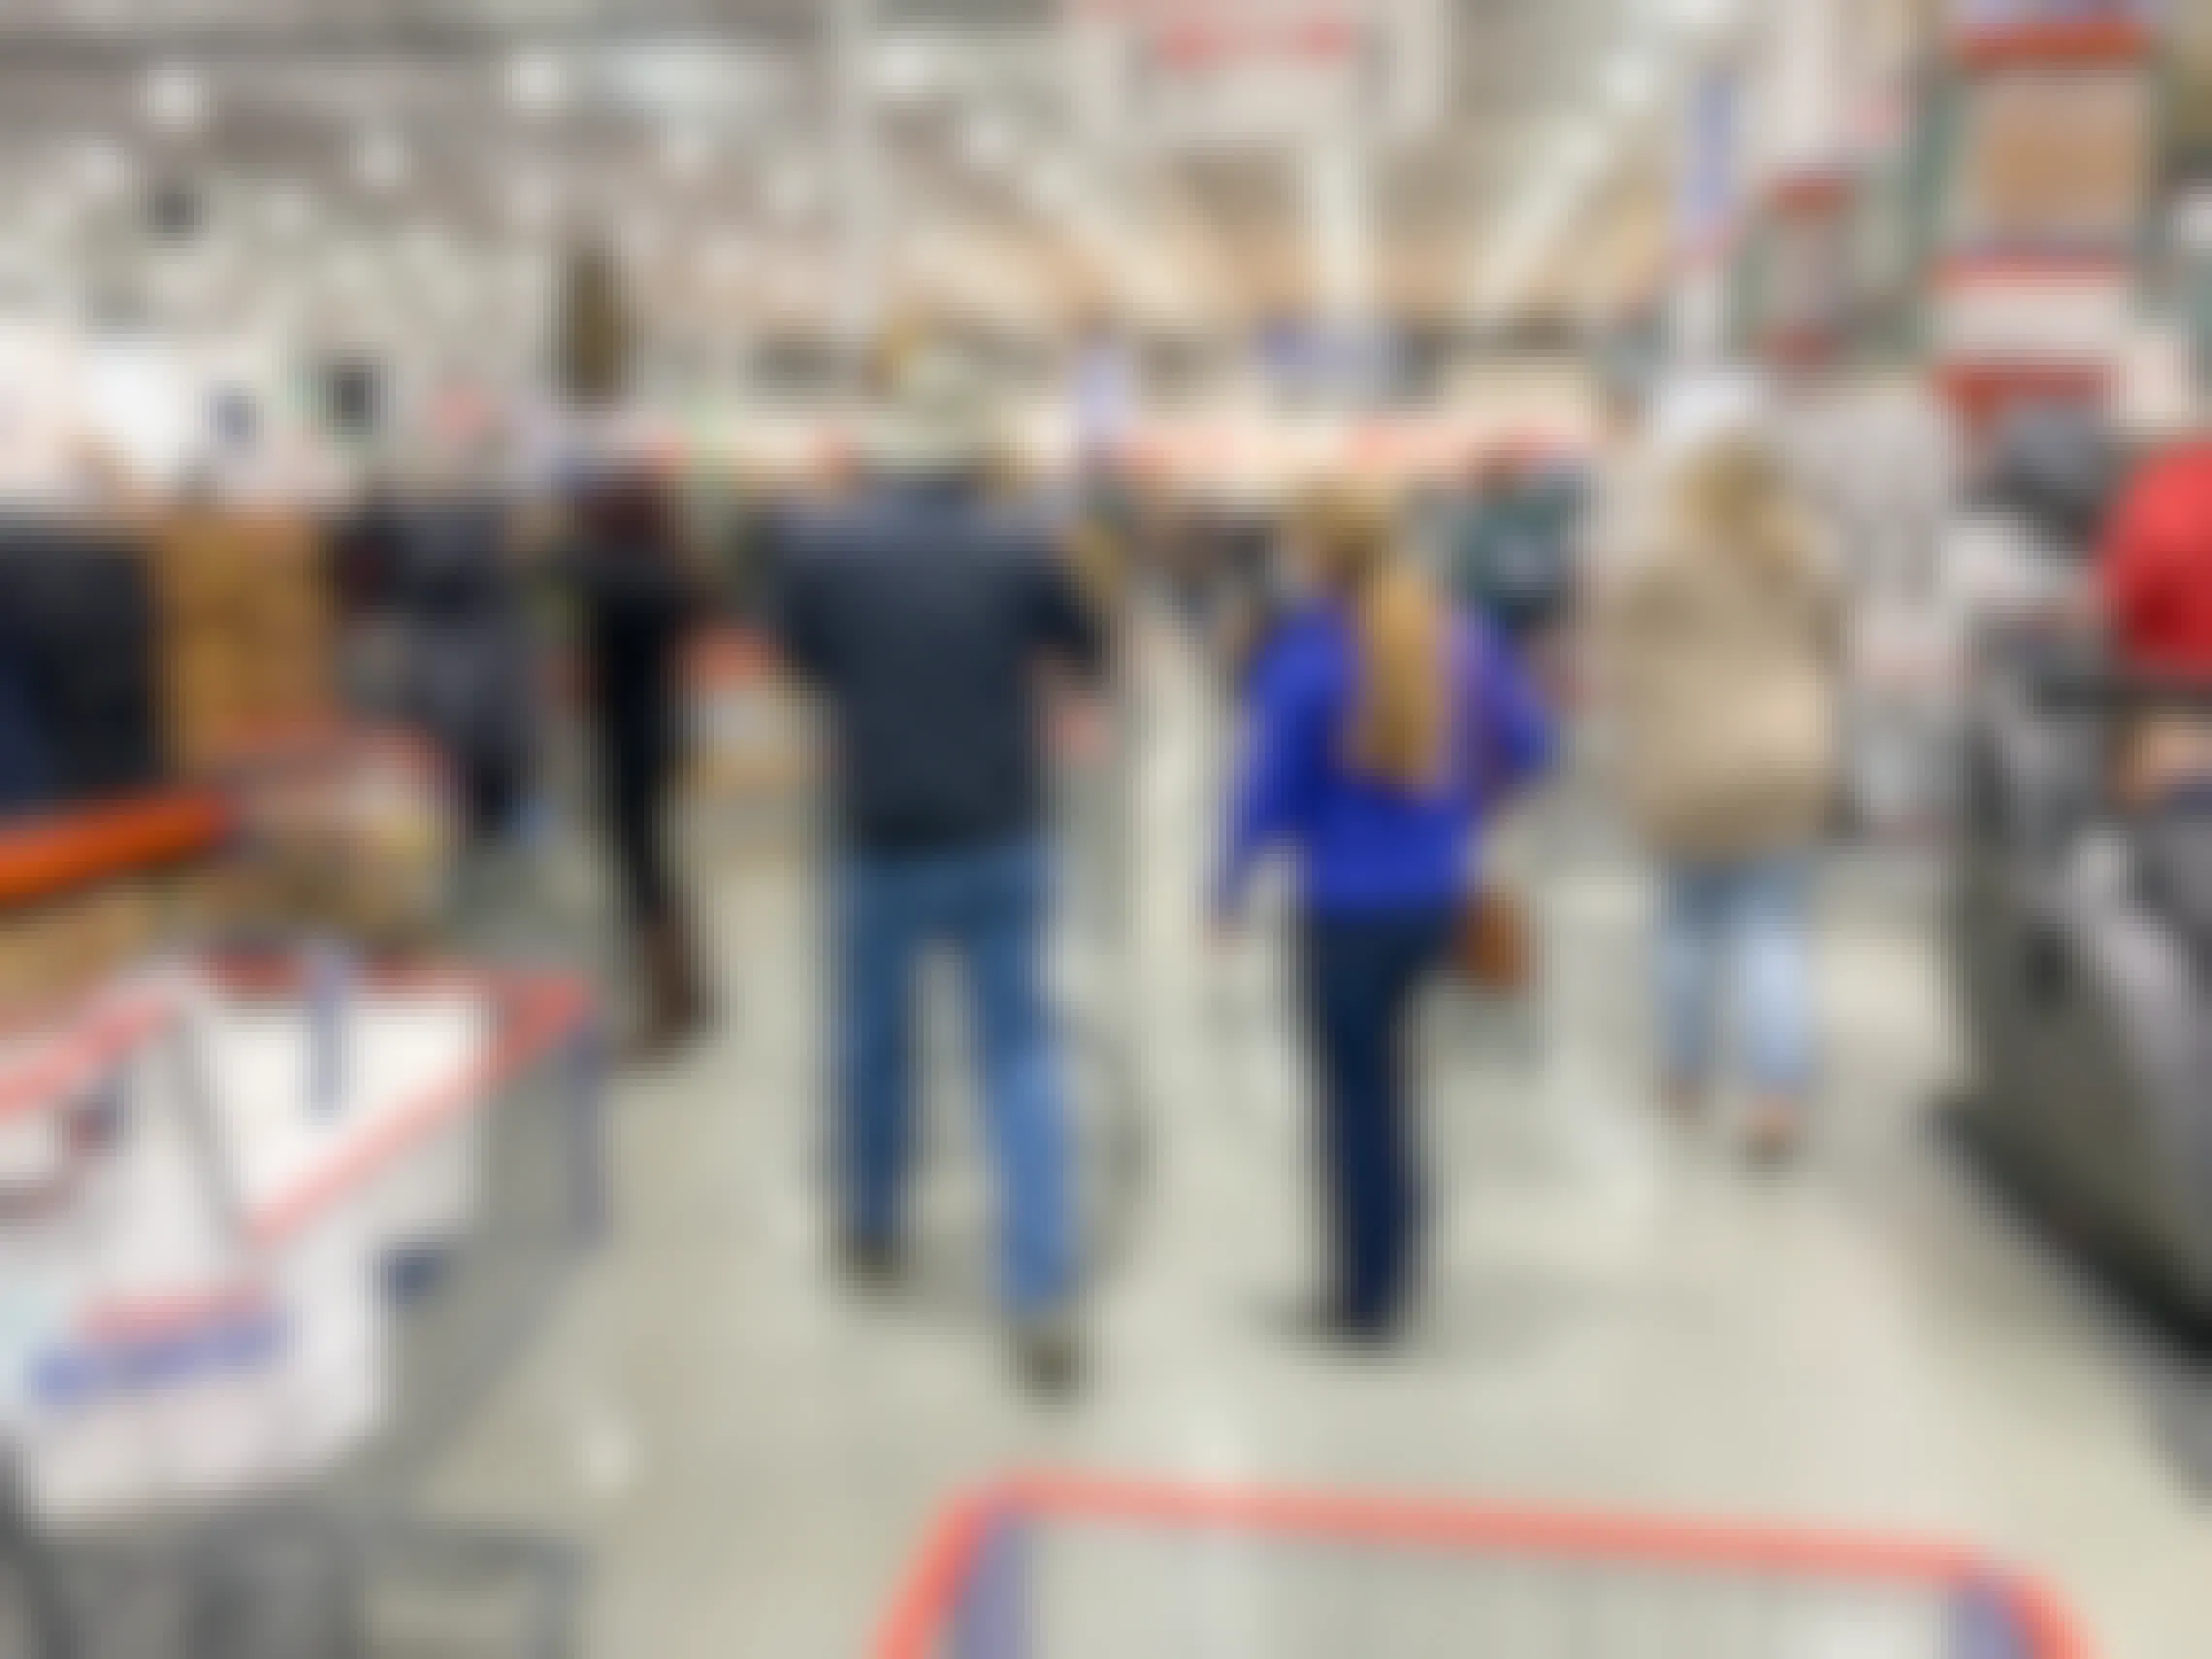 A crowd of people shopping in Costco.